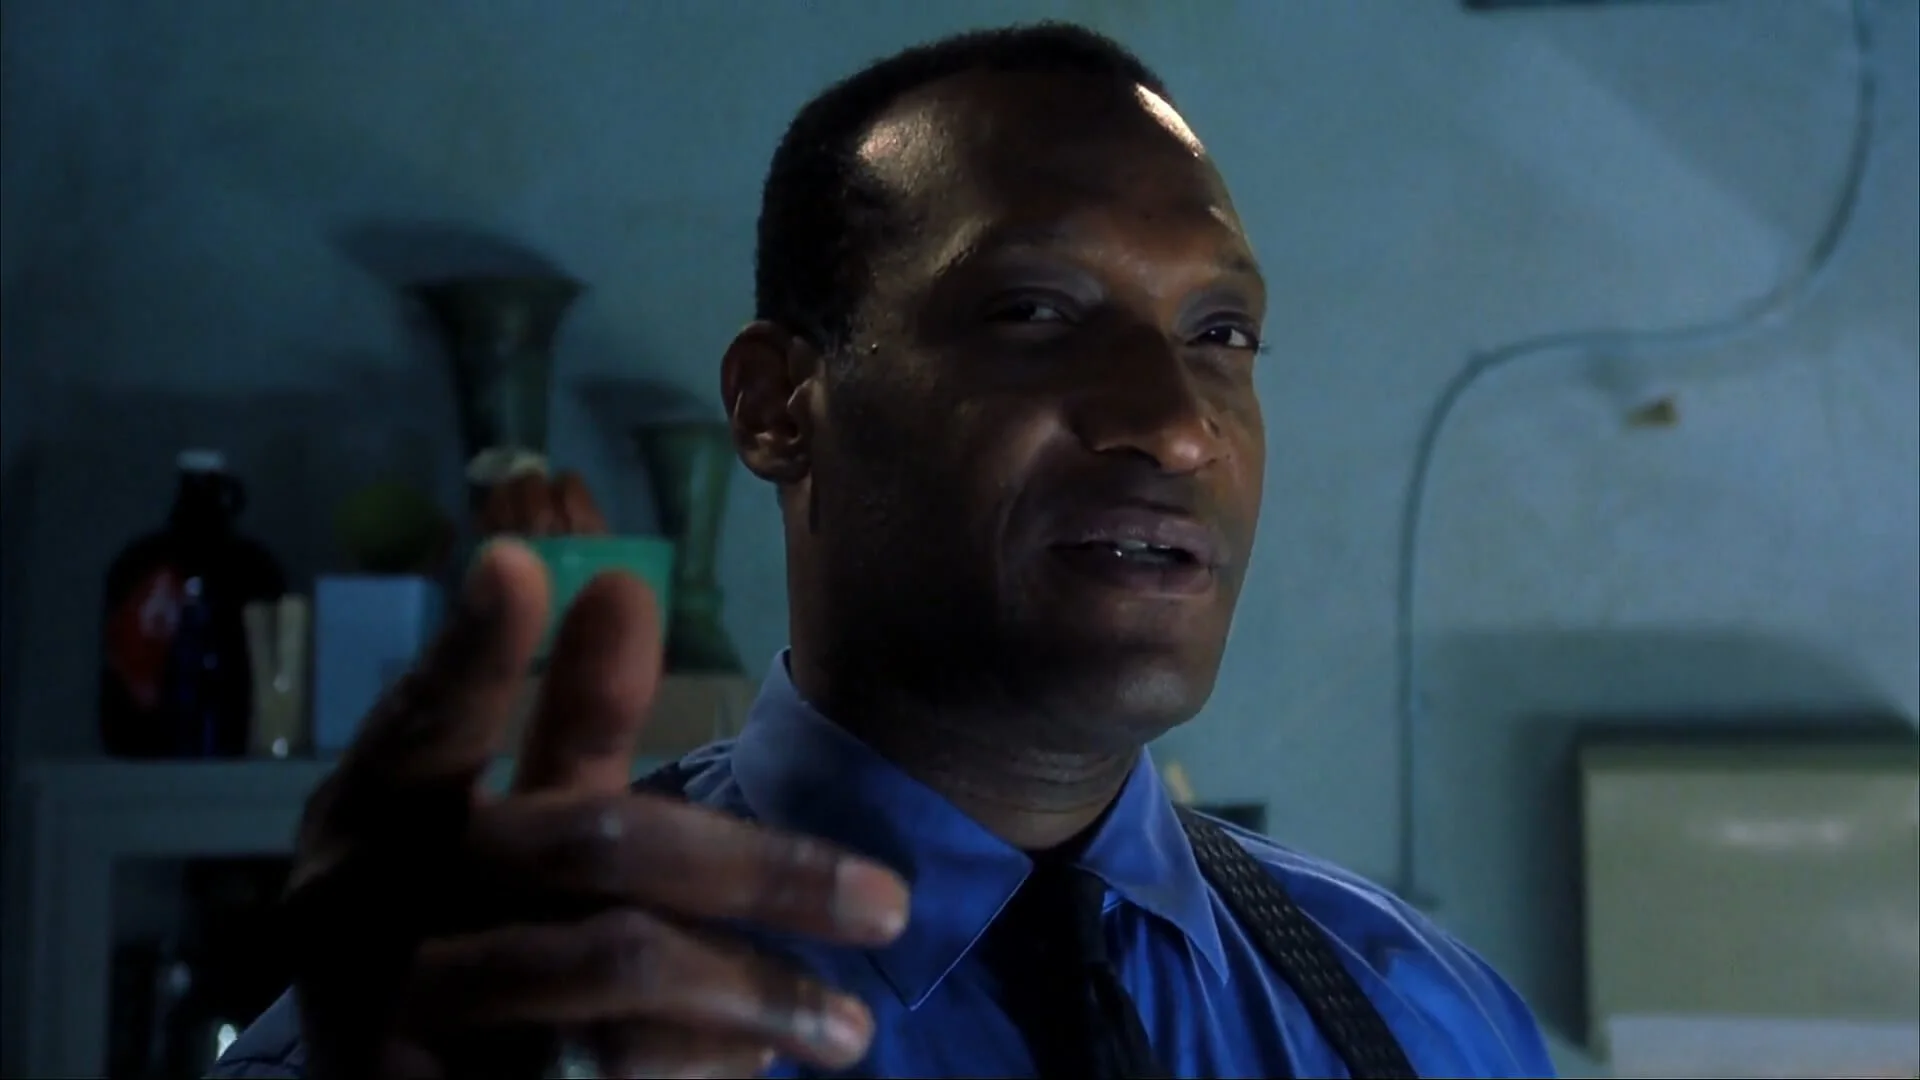 Be My Victim: The 10 Best Tony Todd Horror Movies of All Time